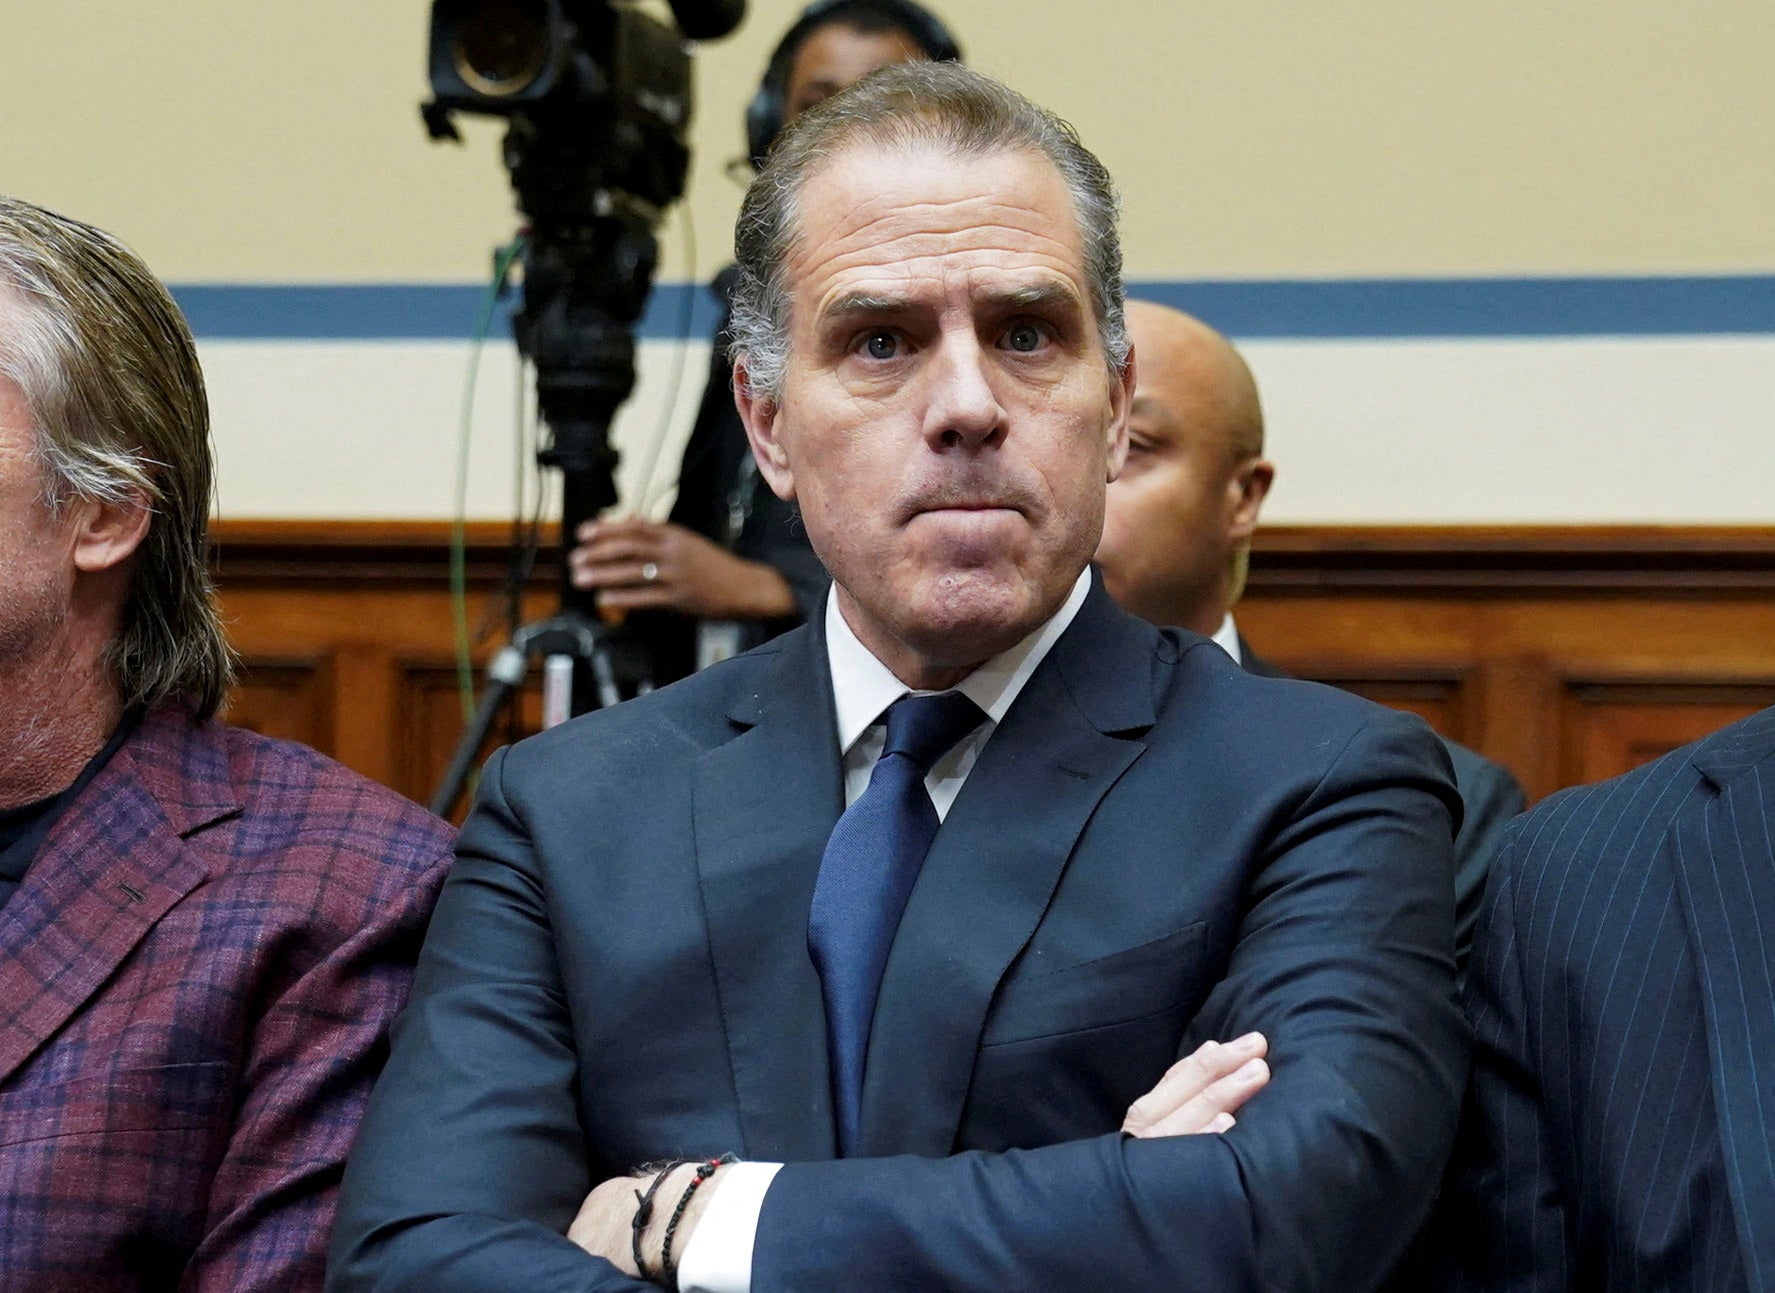 Hunter Biden faces allegations he lied about his drug use during a 2018 gun purchase